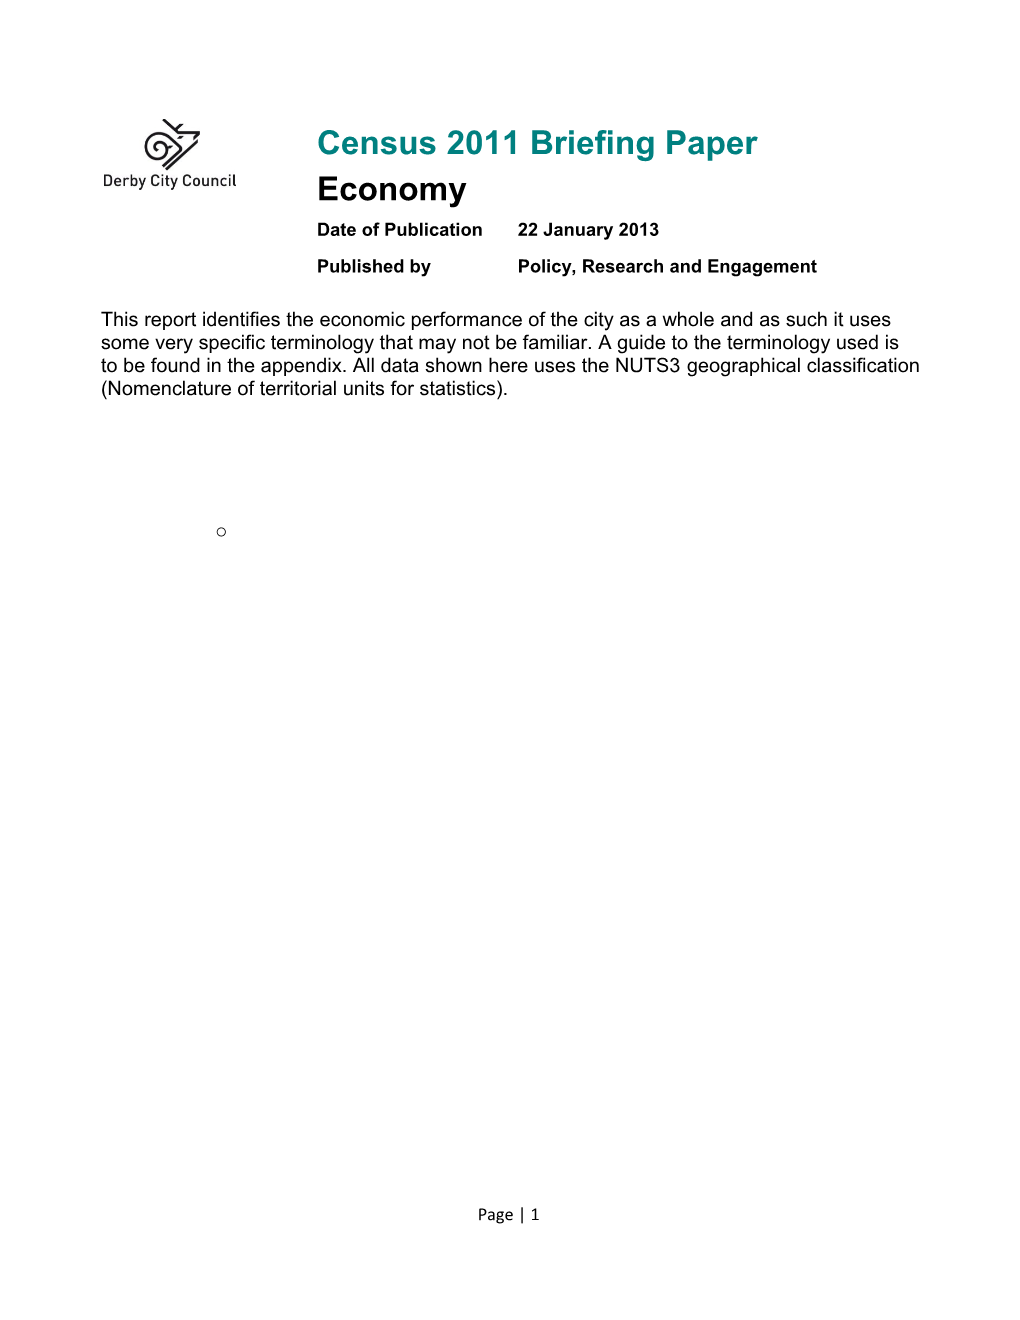 This Report Identifies the Economic Performance of the City As a Whole and As Such It Uses